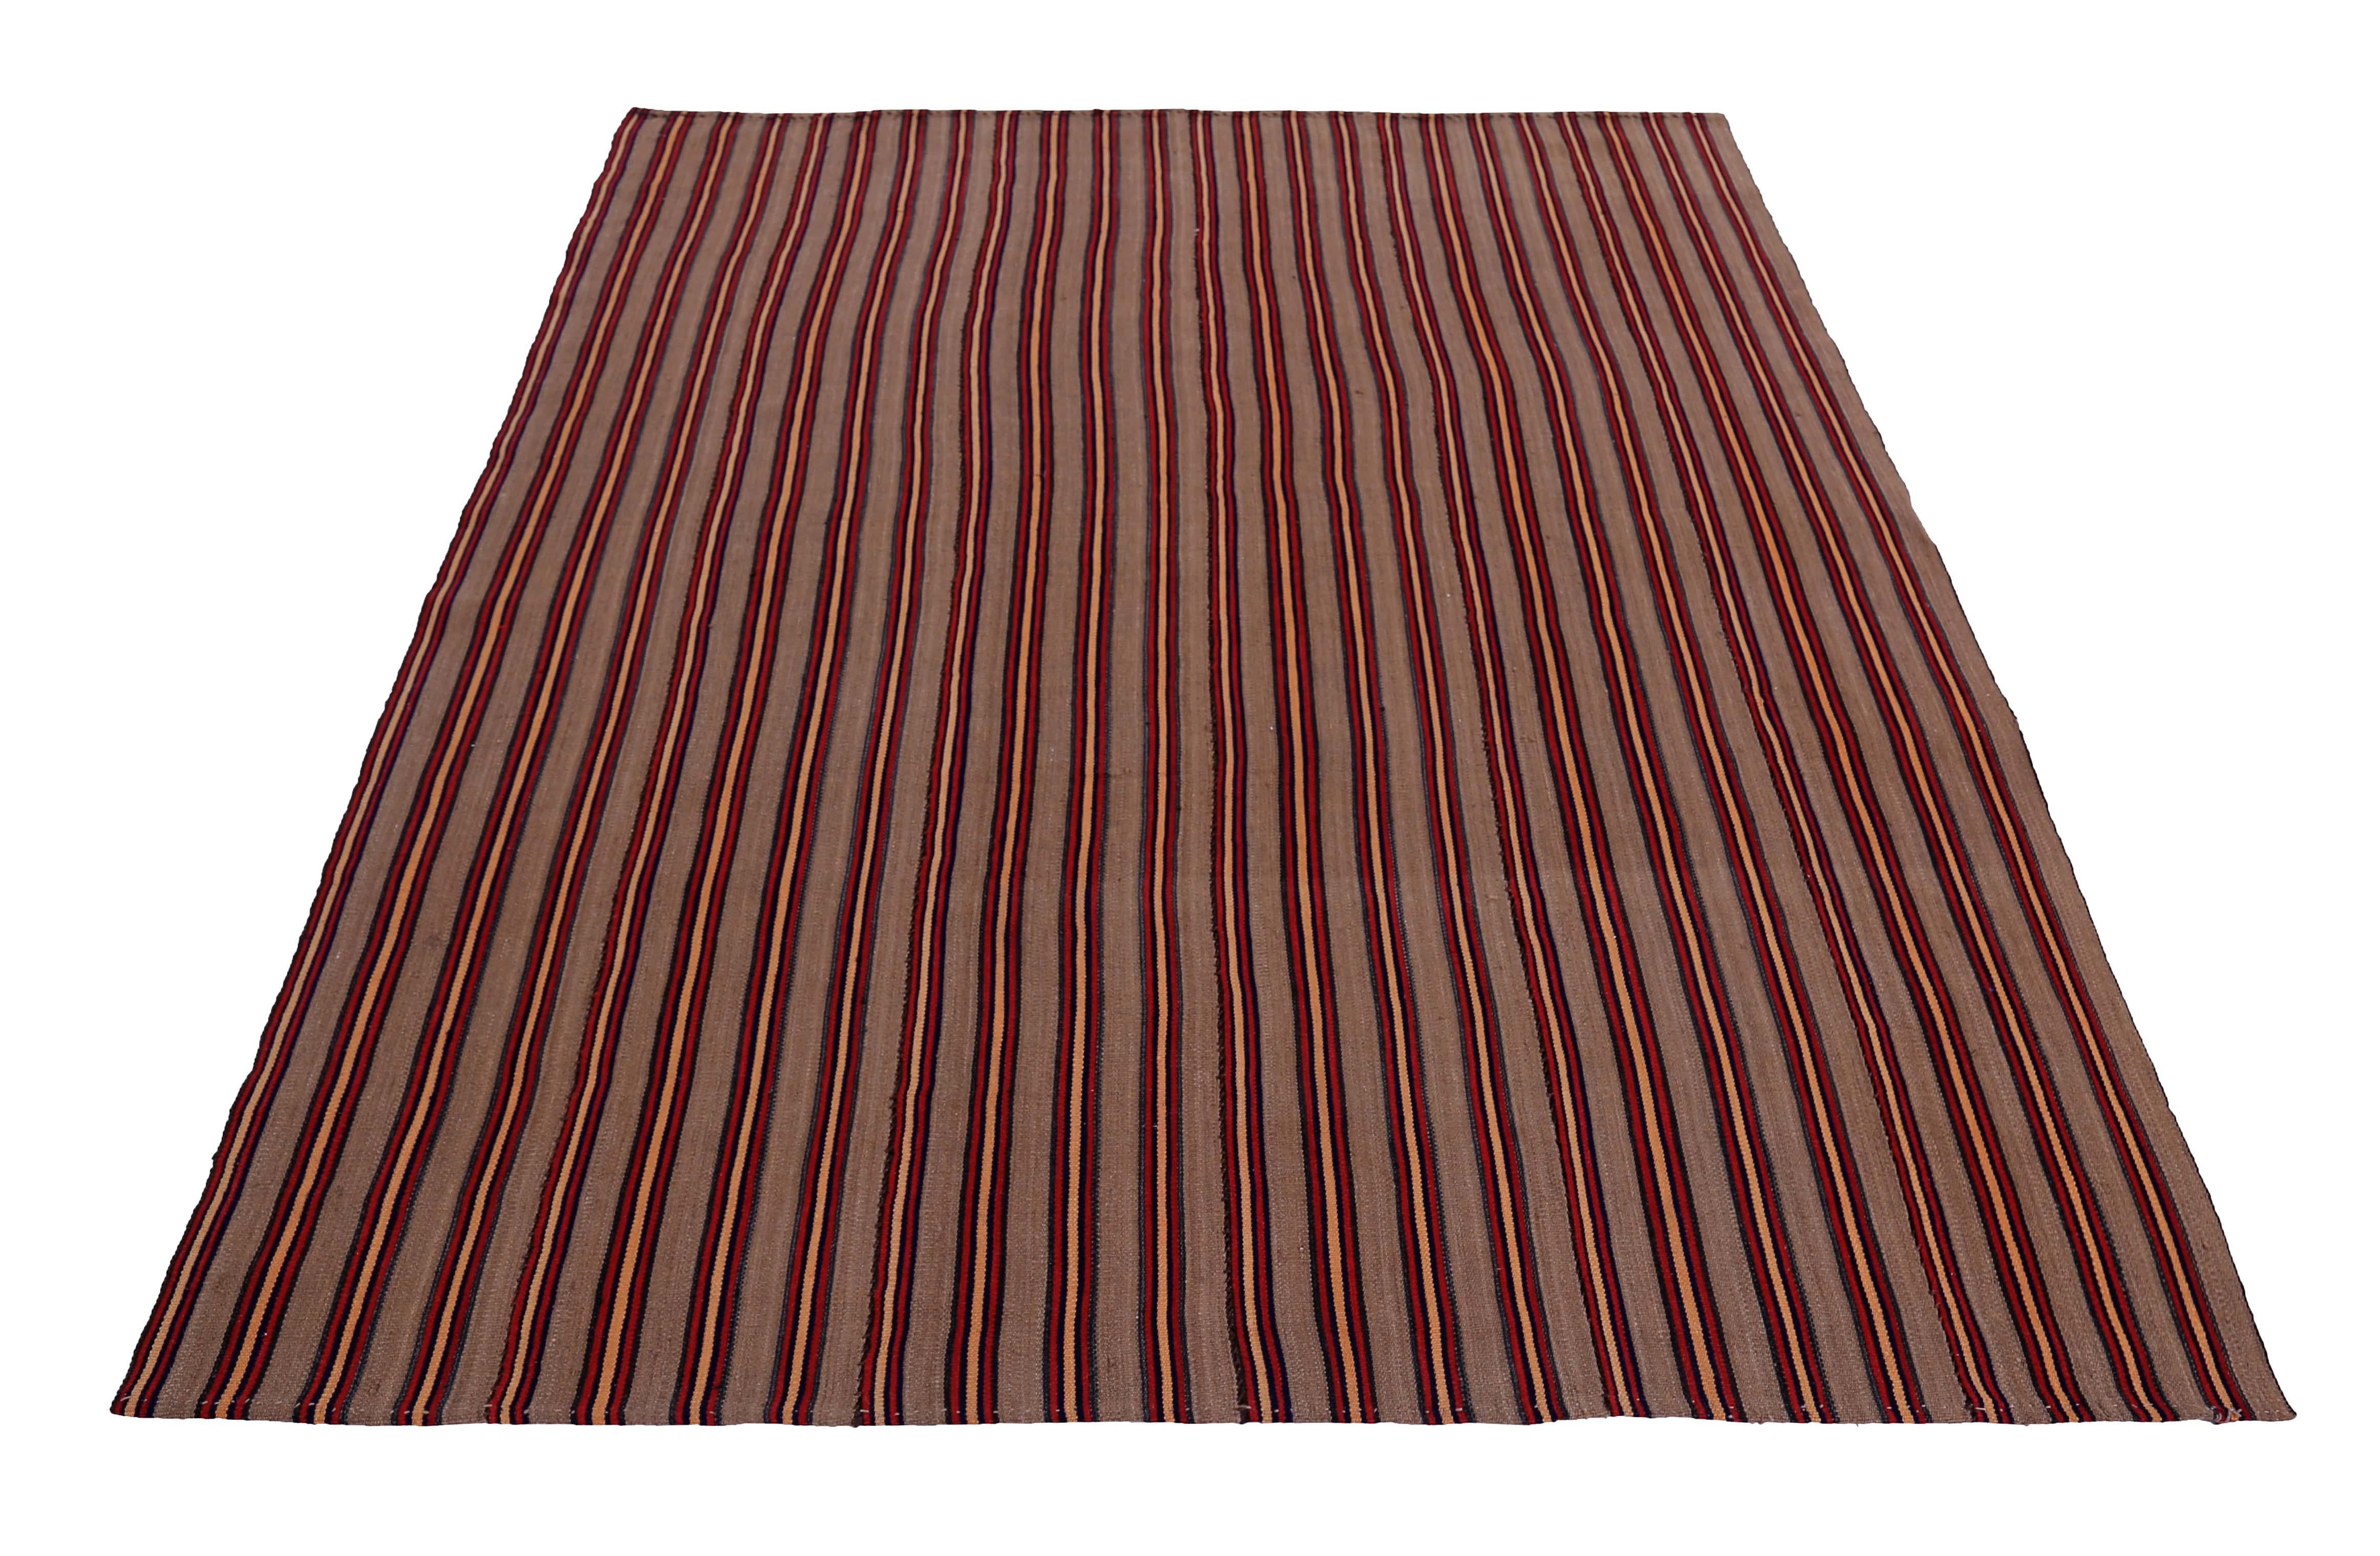 Turkish rug handwoven from the finest sheep’s wool and colored with all-natural vegetable dyes that are safe for humans and pets. It’s a traditional Kilim flat-weave design featuring red, orange and black pencil stripes in a beige field. It’s a